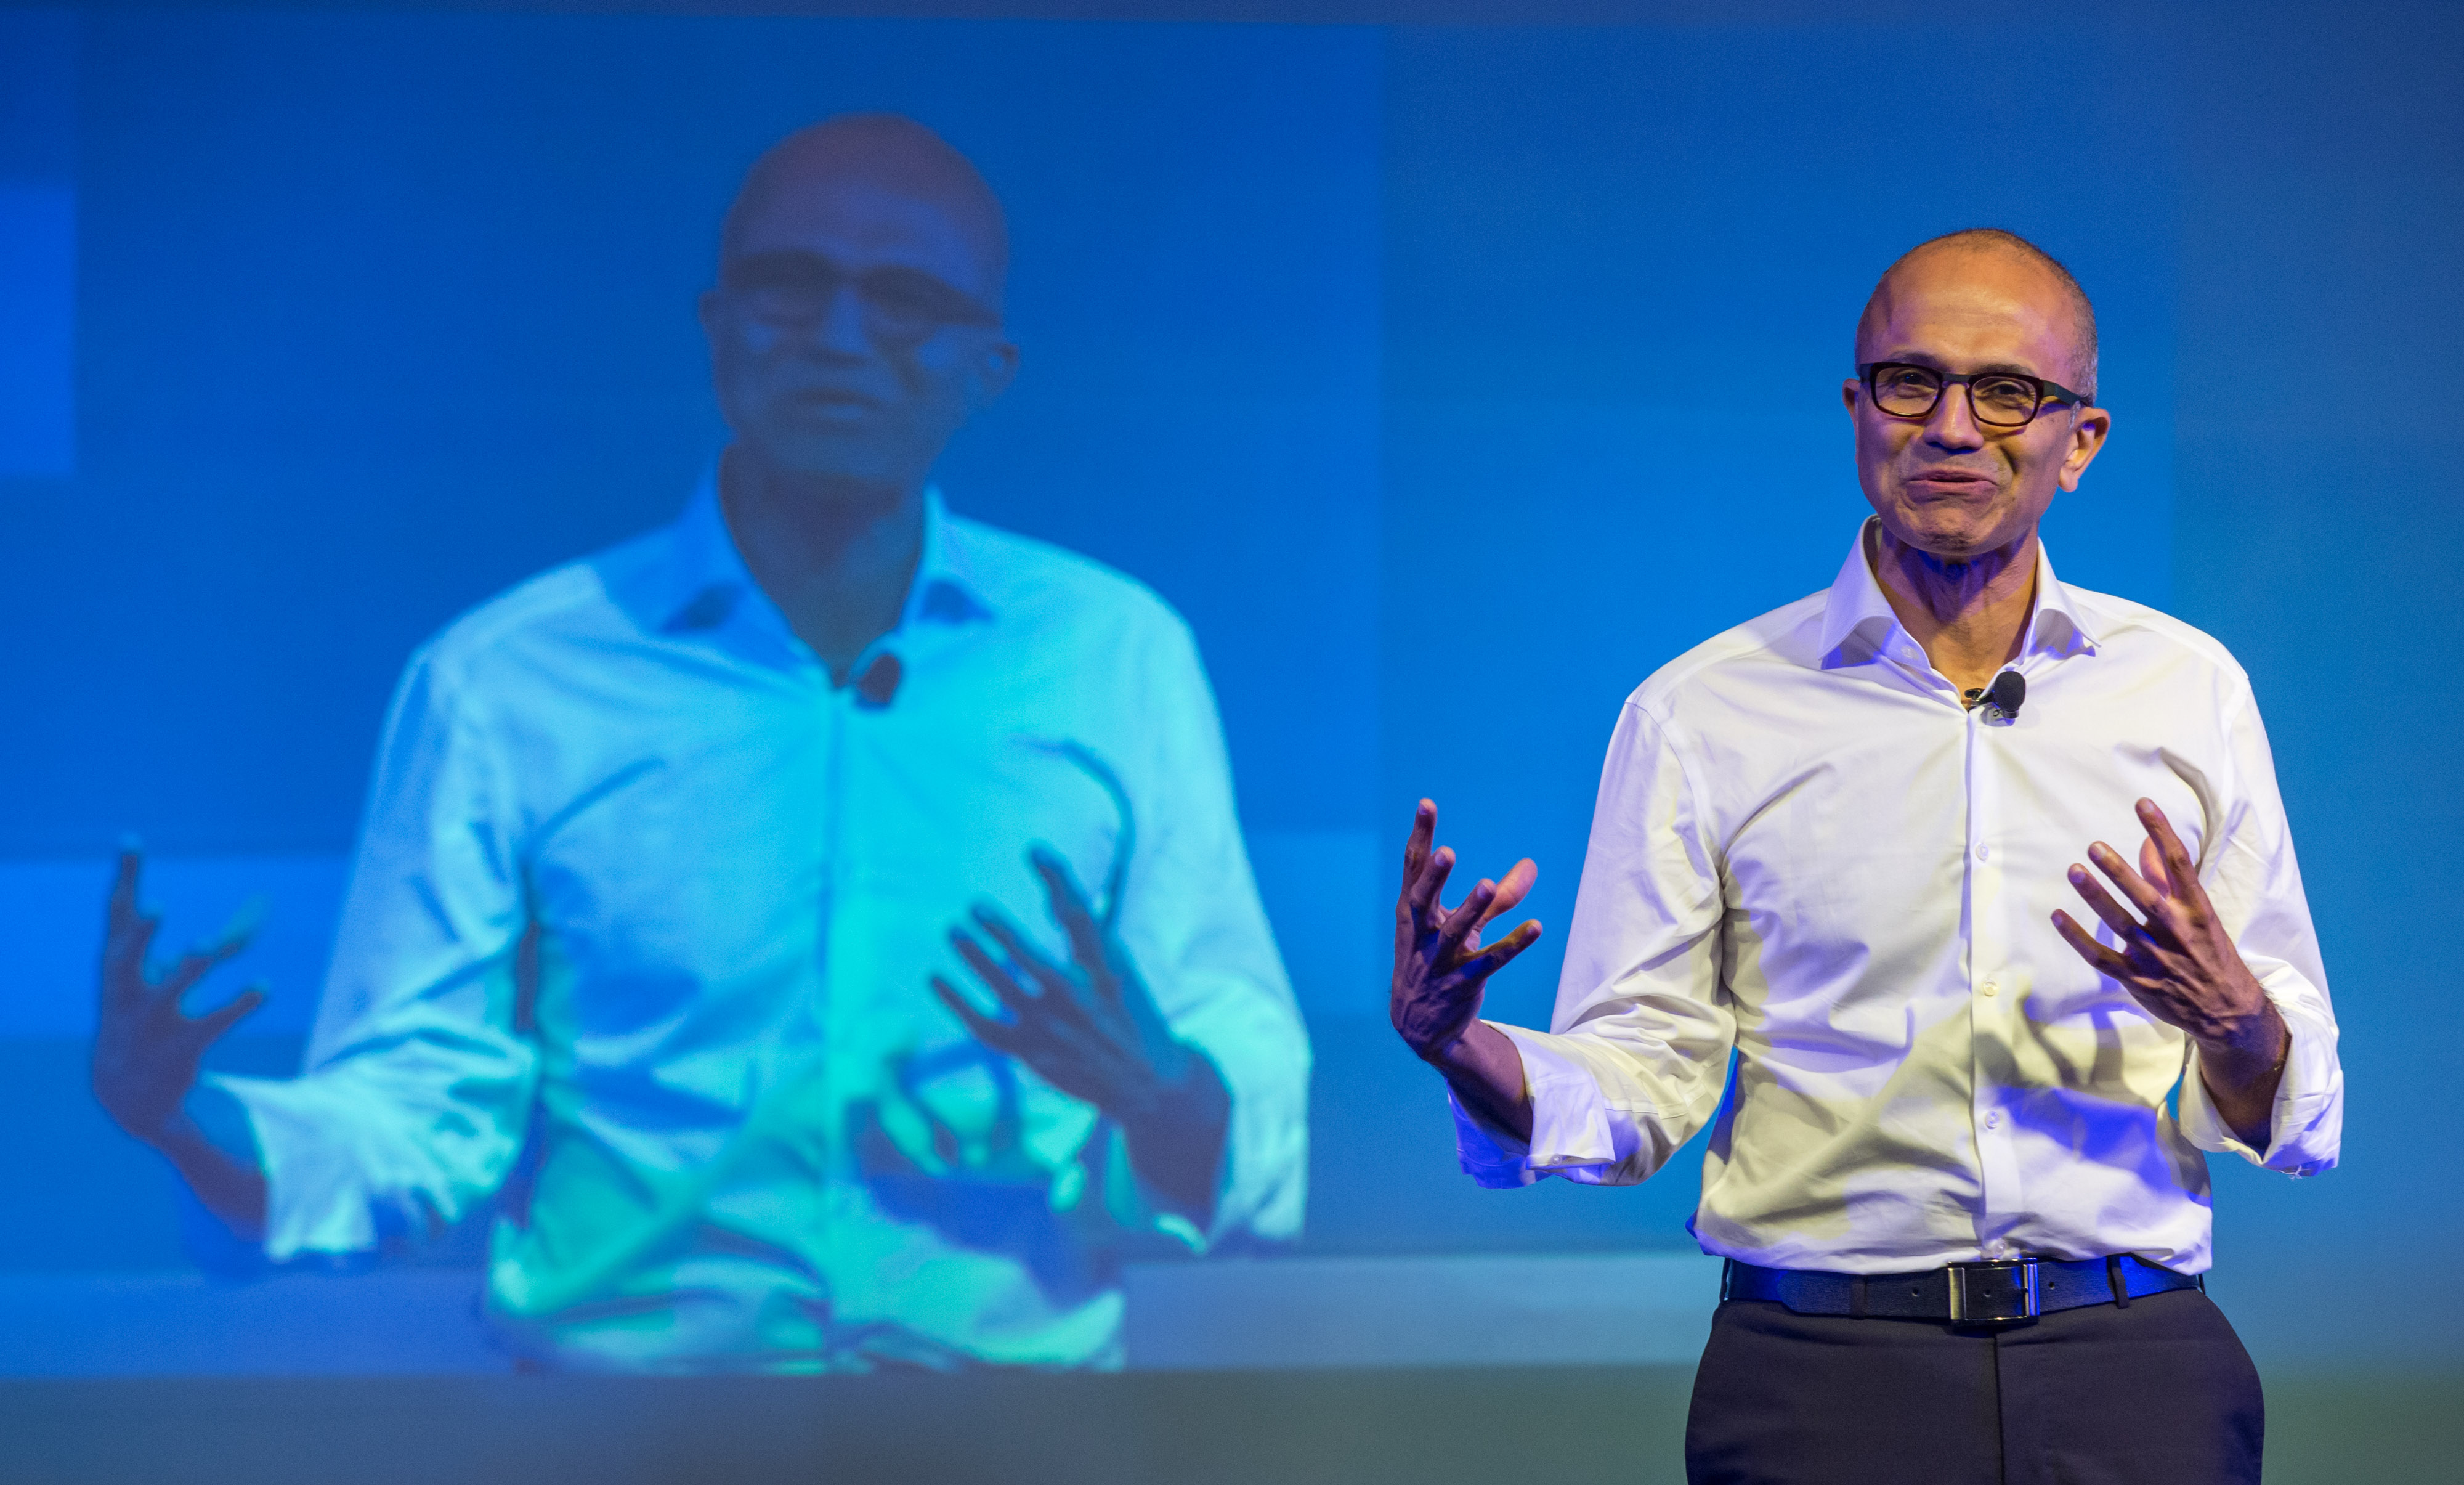 Satya Nadella, chief executive officer of Microsoft Corp., speaks to students during the Microsoft Talent India conference in New Delhi, India, on Tuesday, Sept. 30, 2014. (Bloomberg&mdash;Bloomberg via Getty Images)